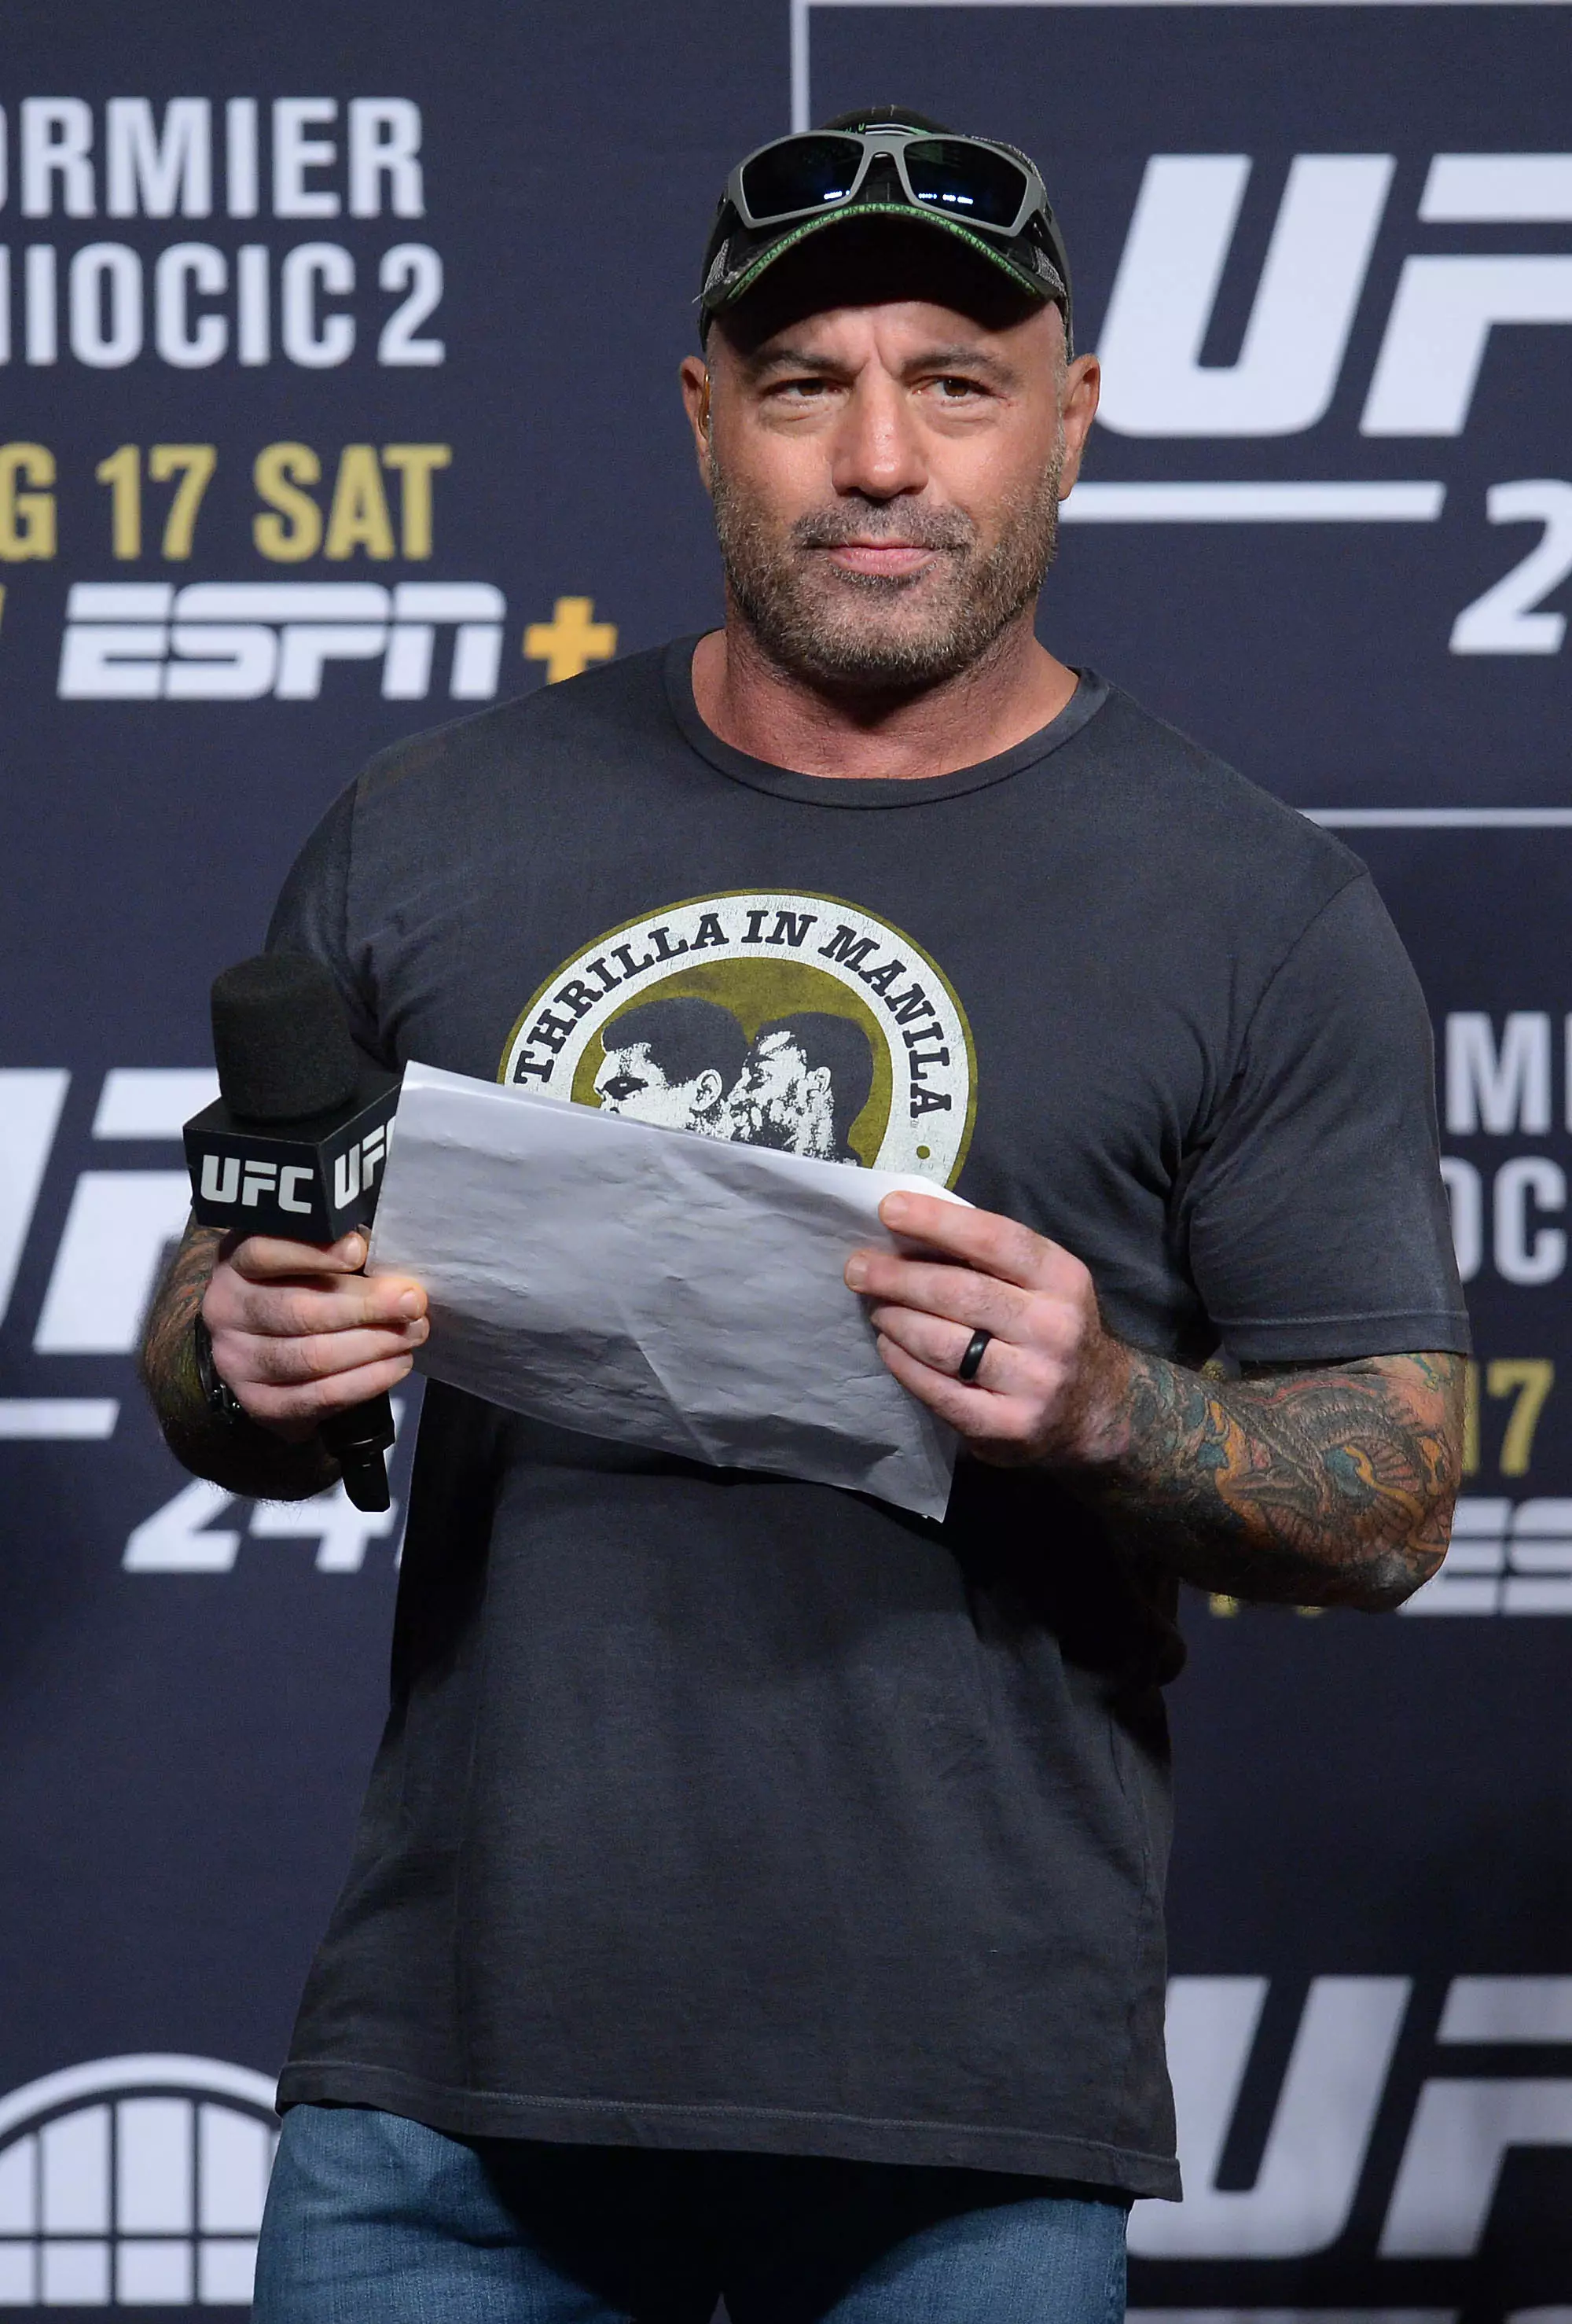 It wasn't all plain-sailing for Rogan, however, he also suffered with explosive diarrhea.